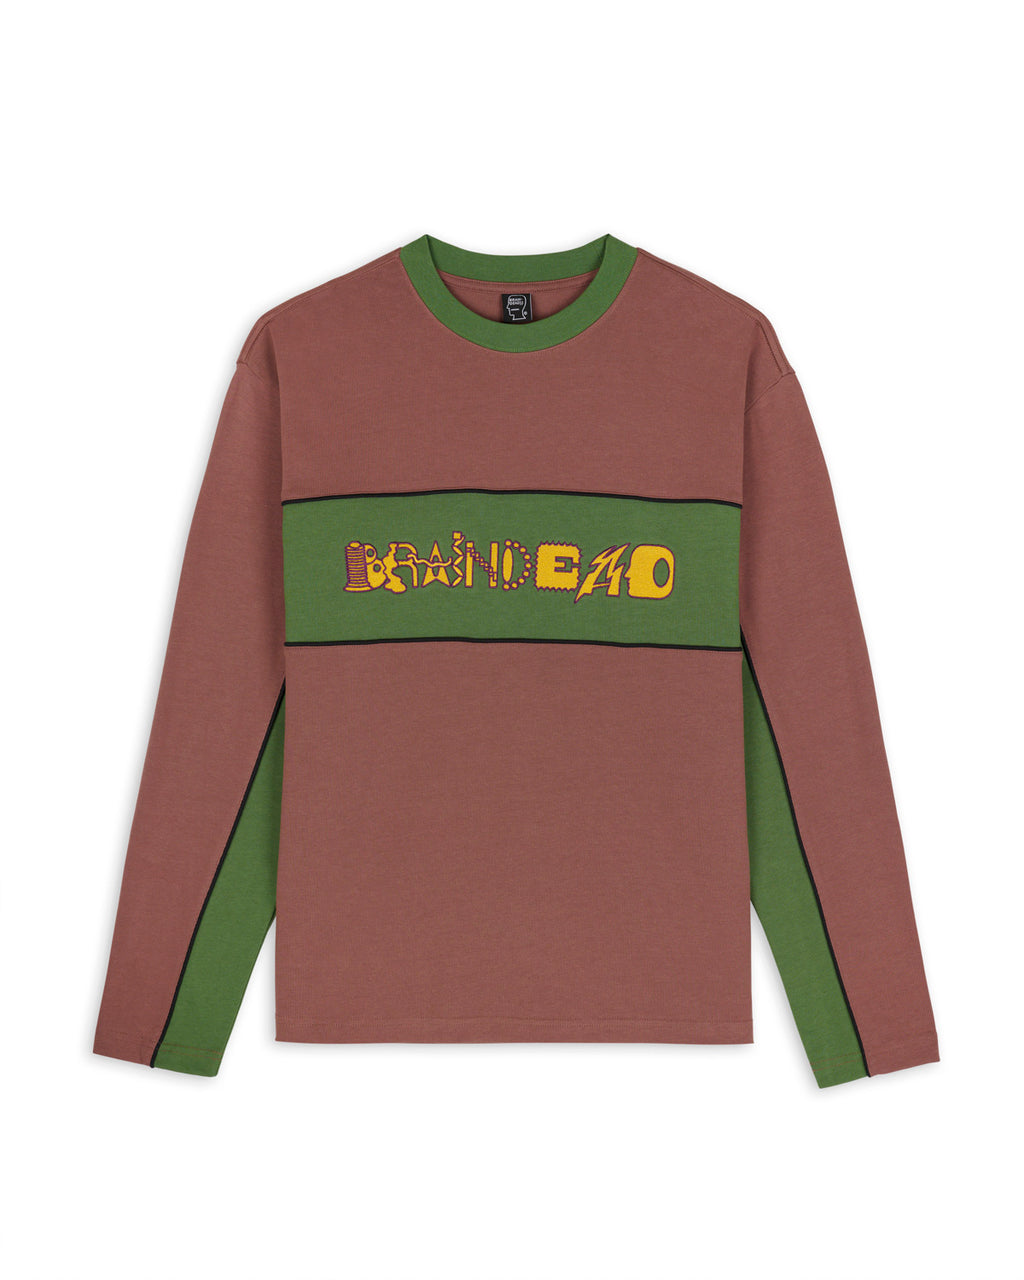 Connections Long Sleeve Football Shirt - Brown Multi